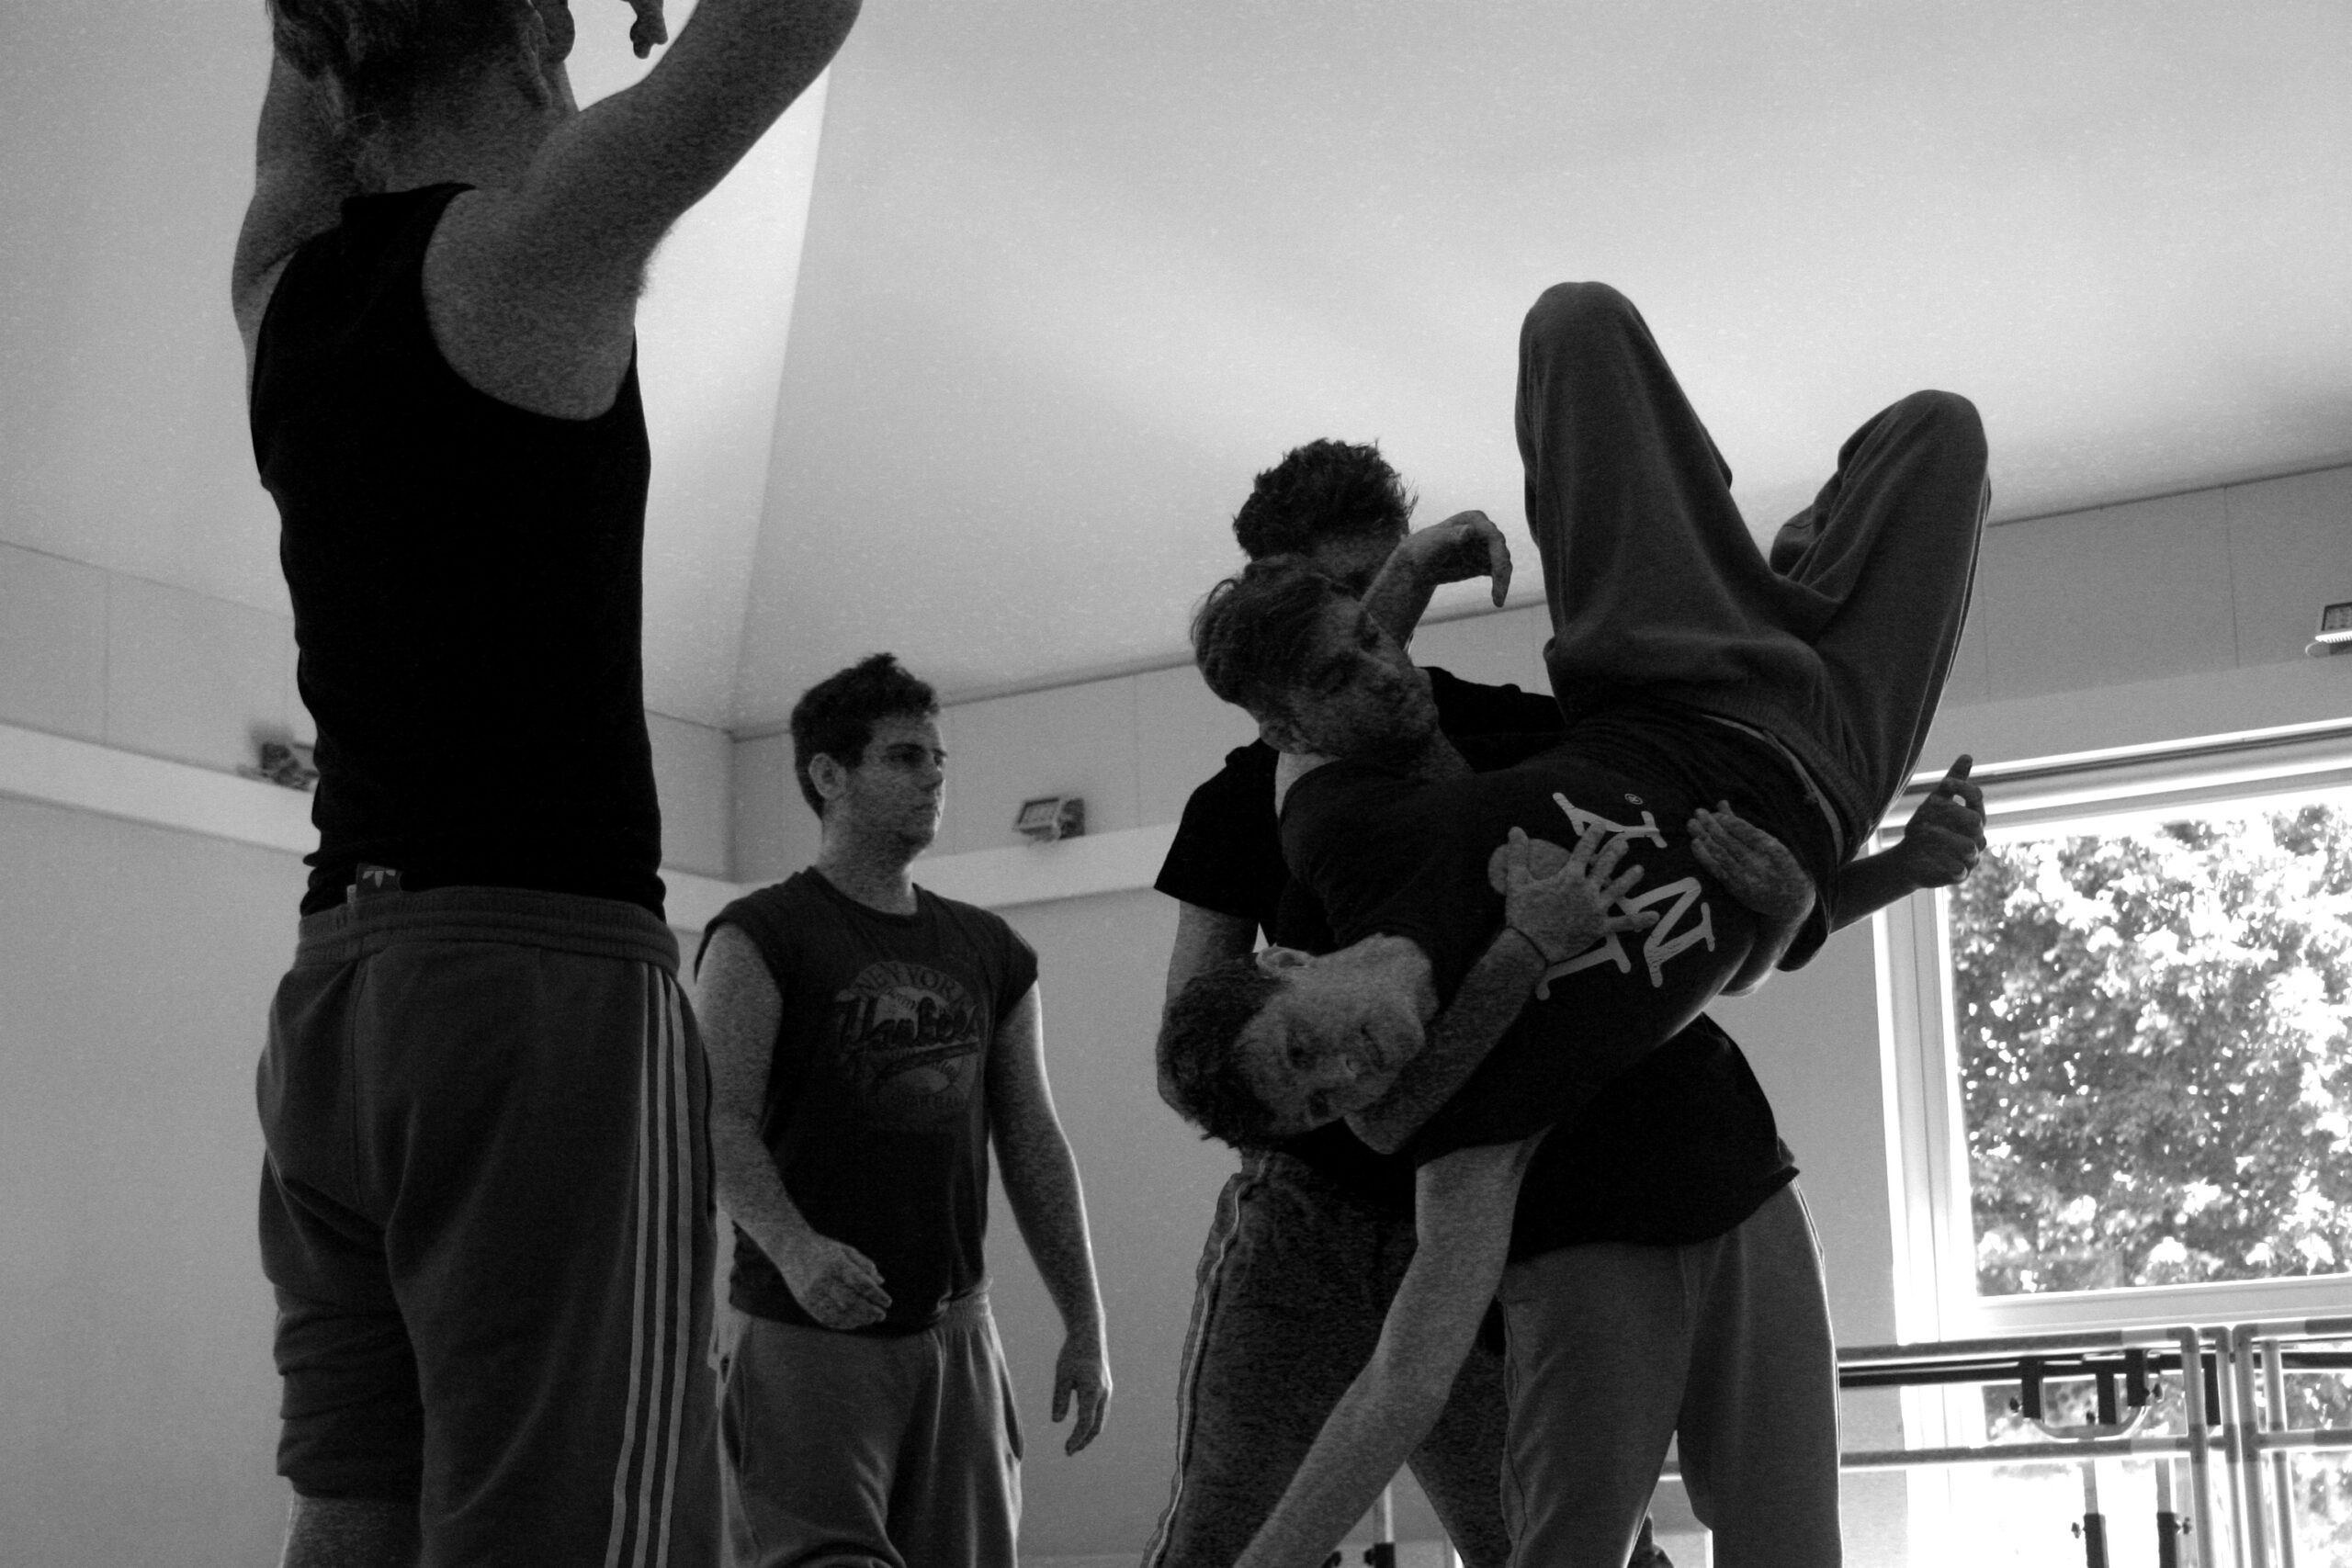 Dancers in rehearsal lift each other